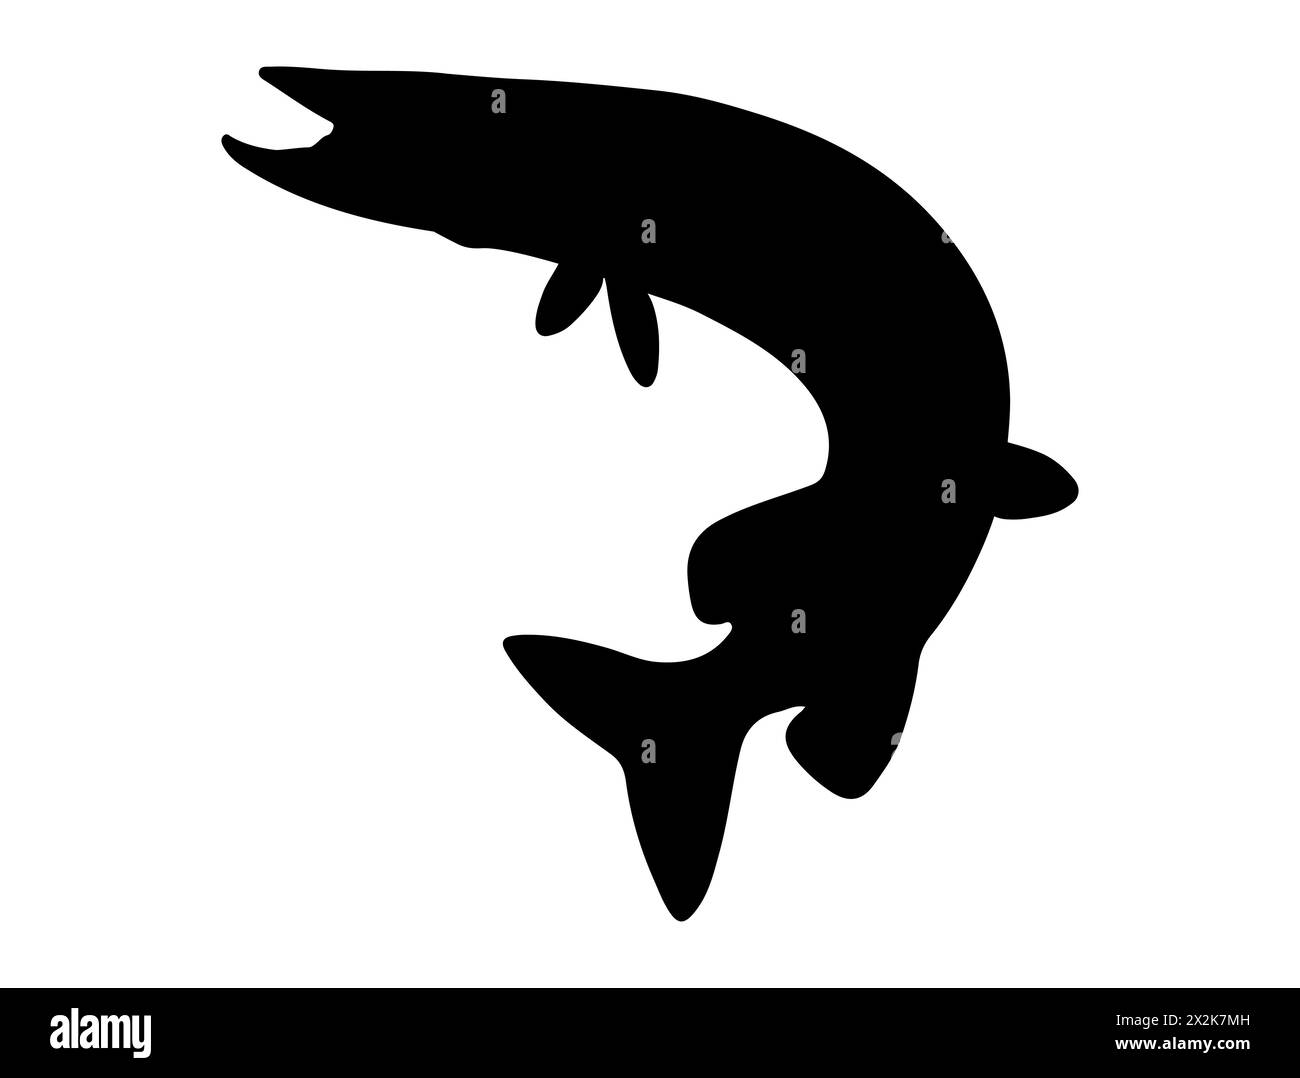 Northern pike fish silhouette vector art Stock Vector